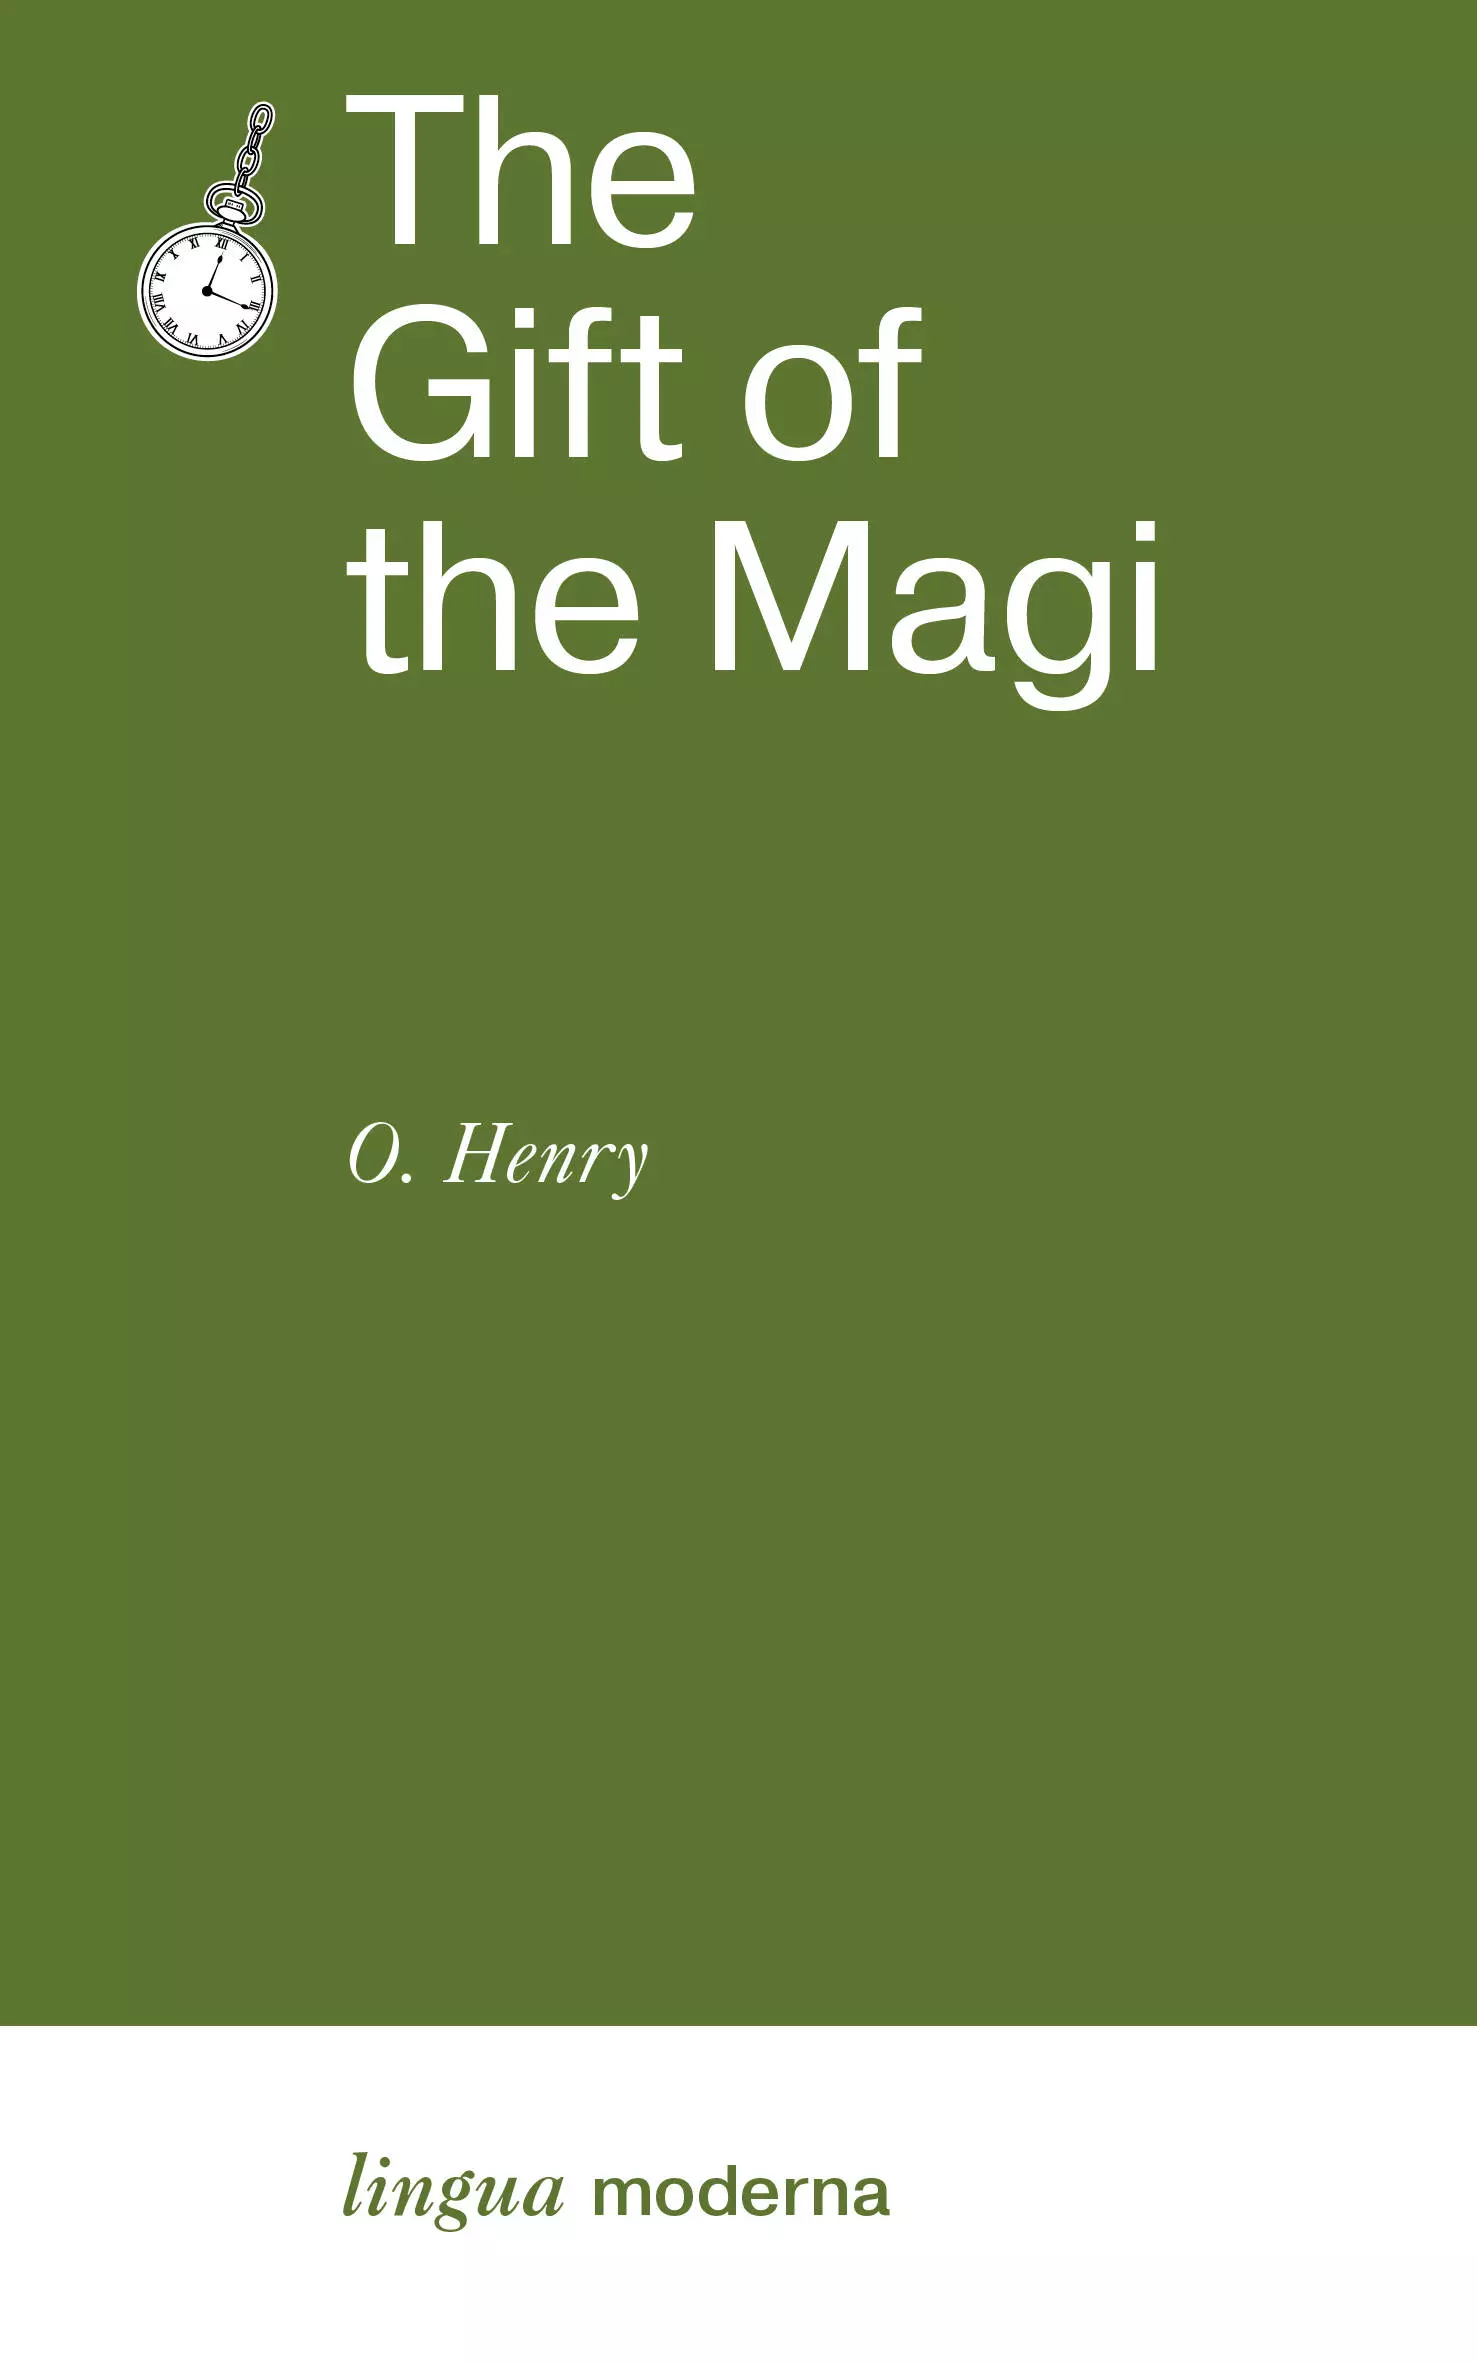 Генри О. The Gift of the Magi генри о дары волхвов и другие рассказы [ the gift of the magi and other stories]